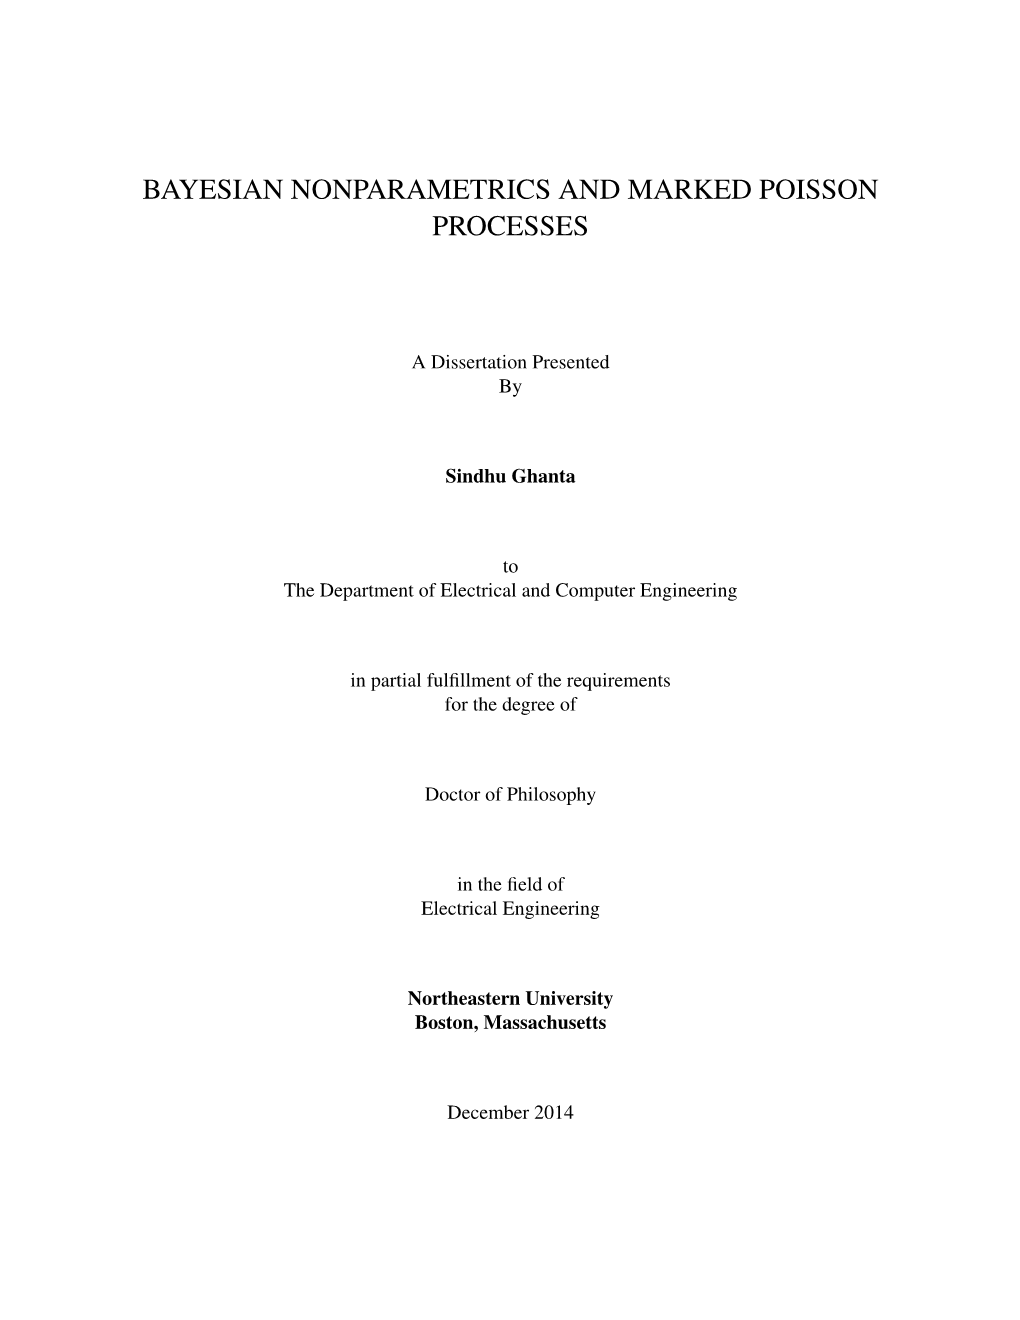 Bayesian Nonparametrics and Marked Poisson Processes